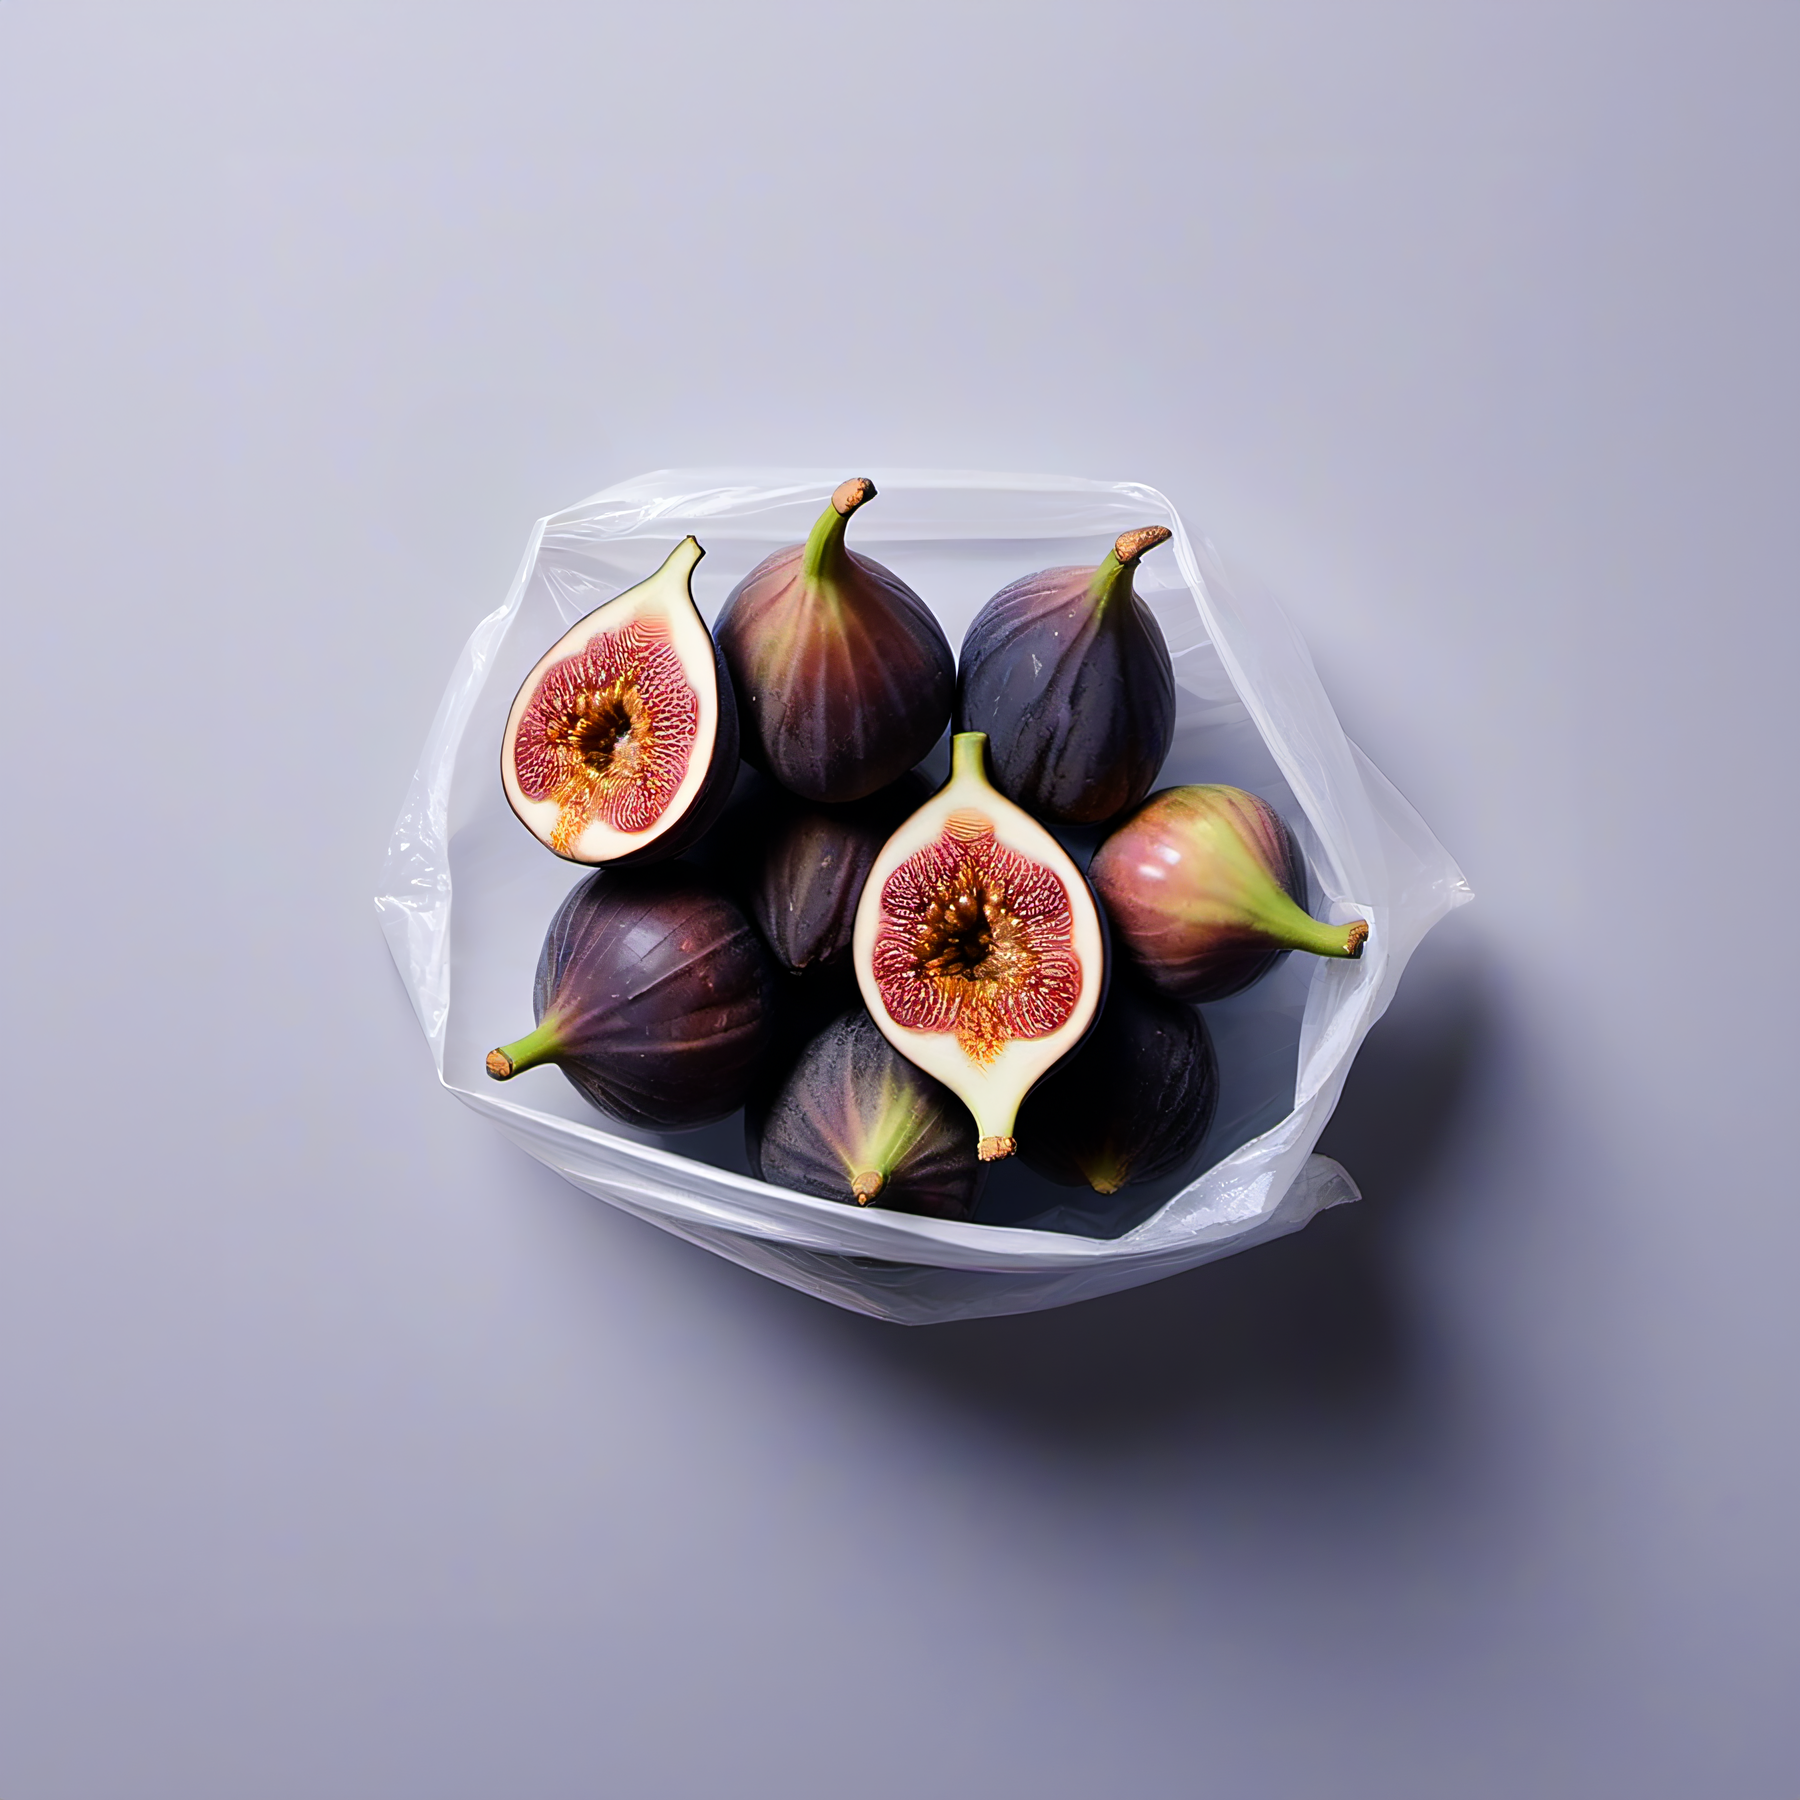 figs in a plastic bag